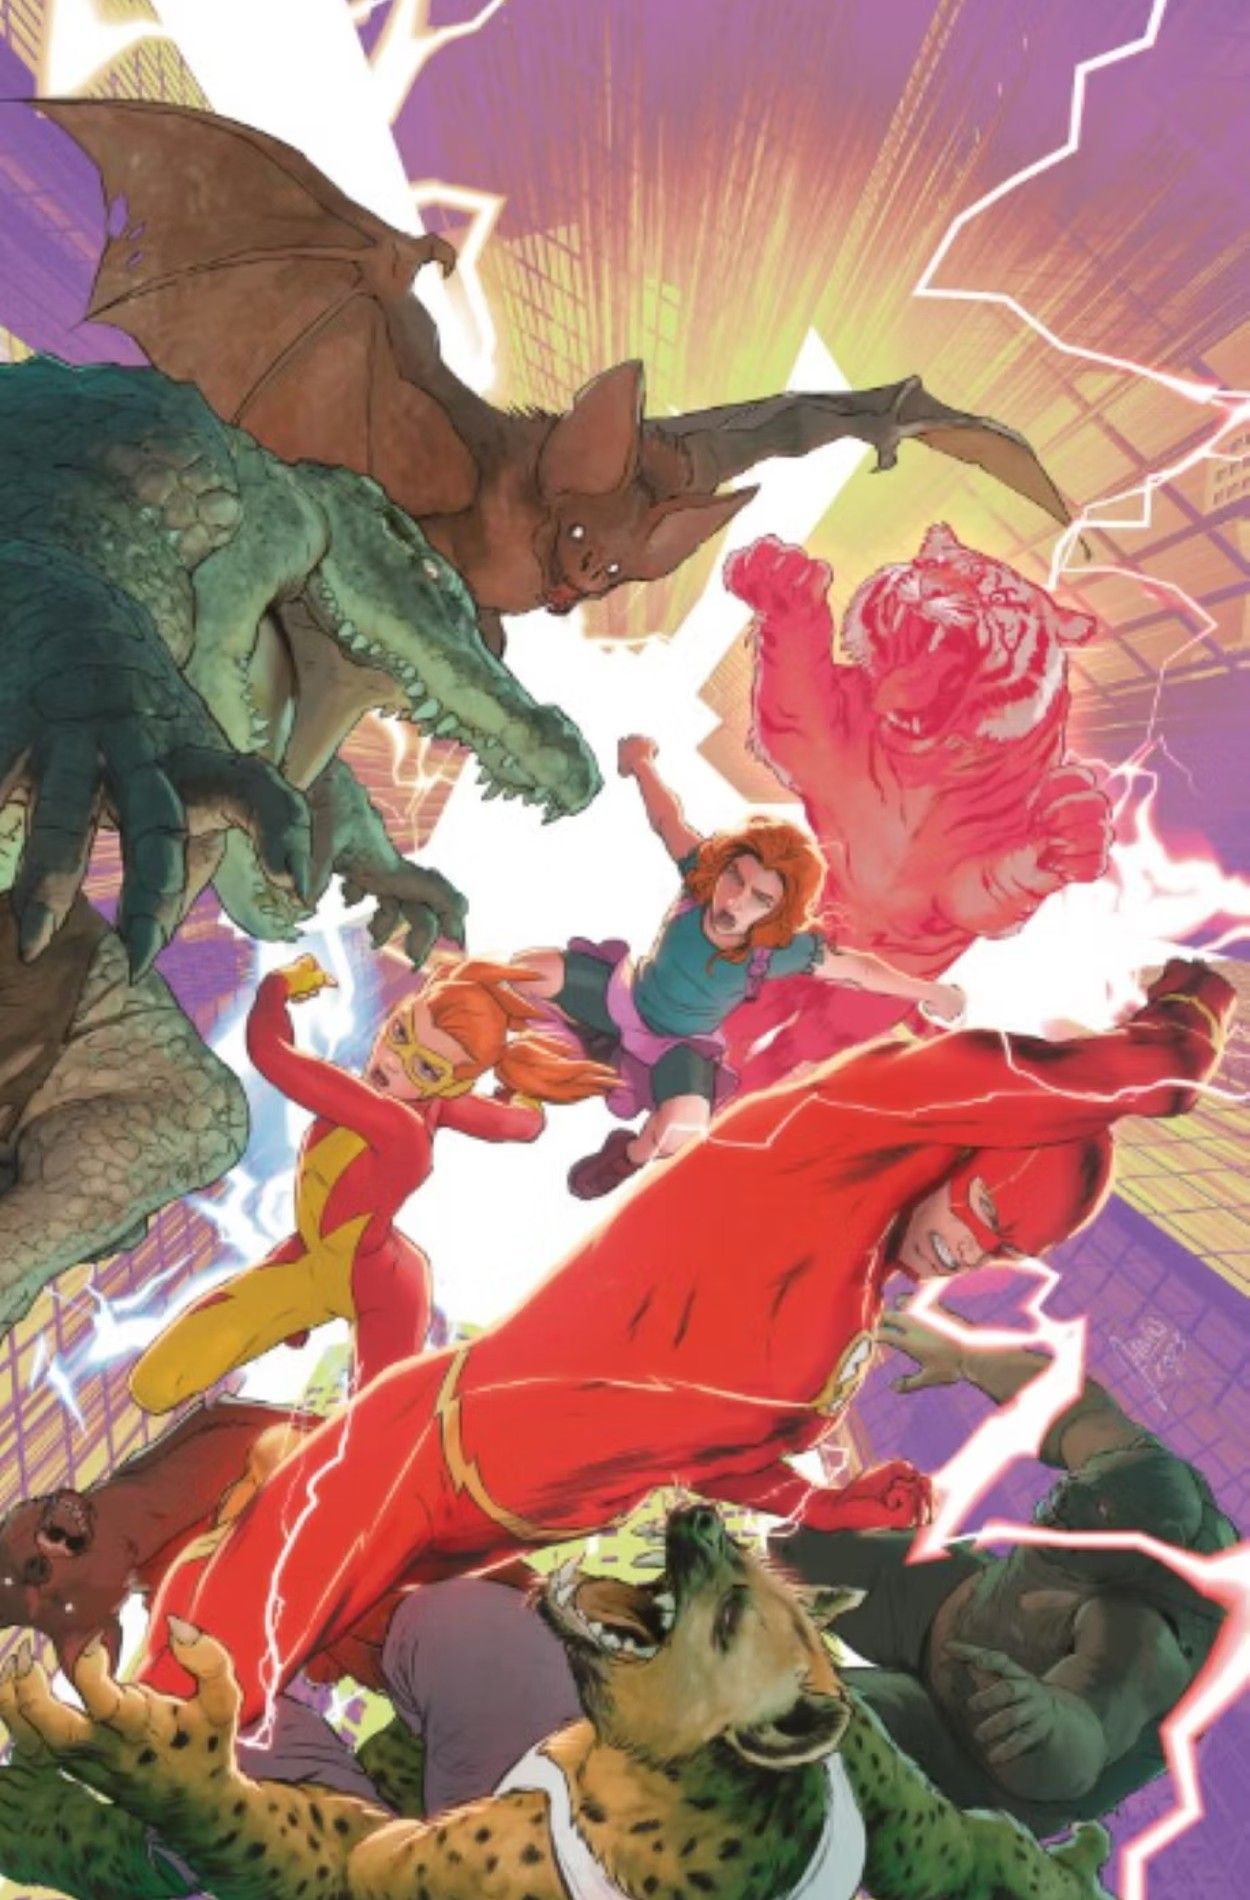 Flash fighting off anthropomorphized animals in promo image for DC